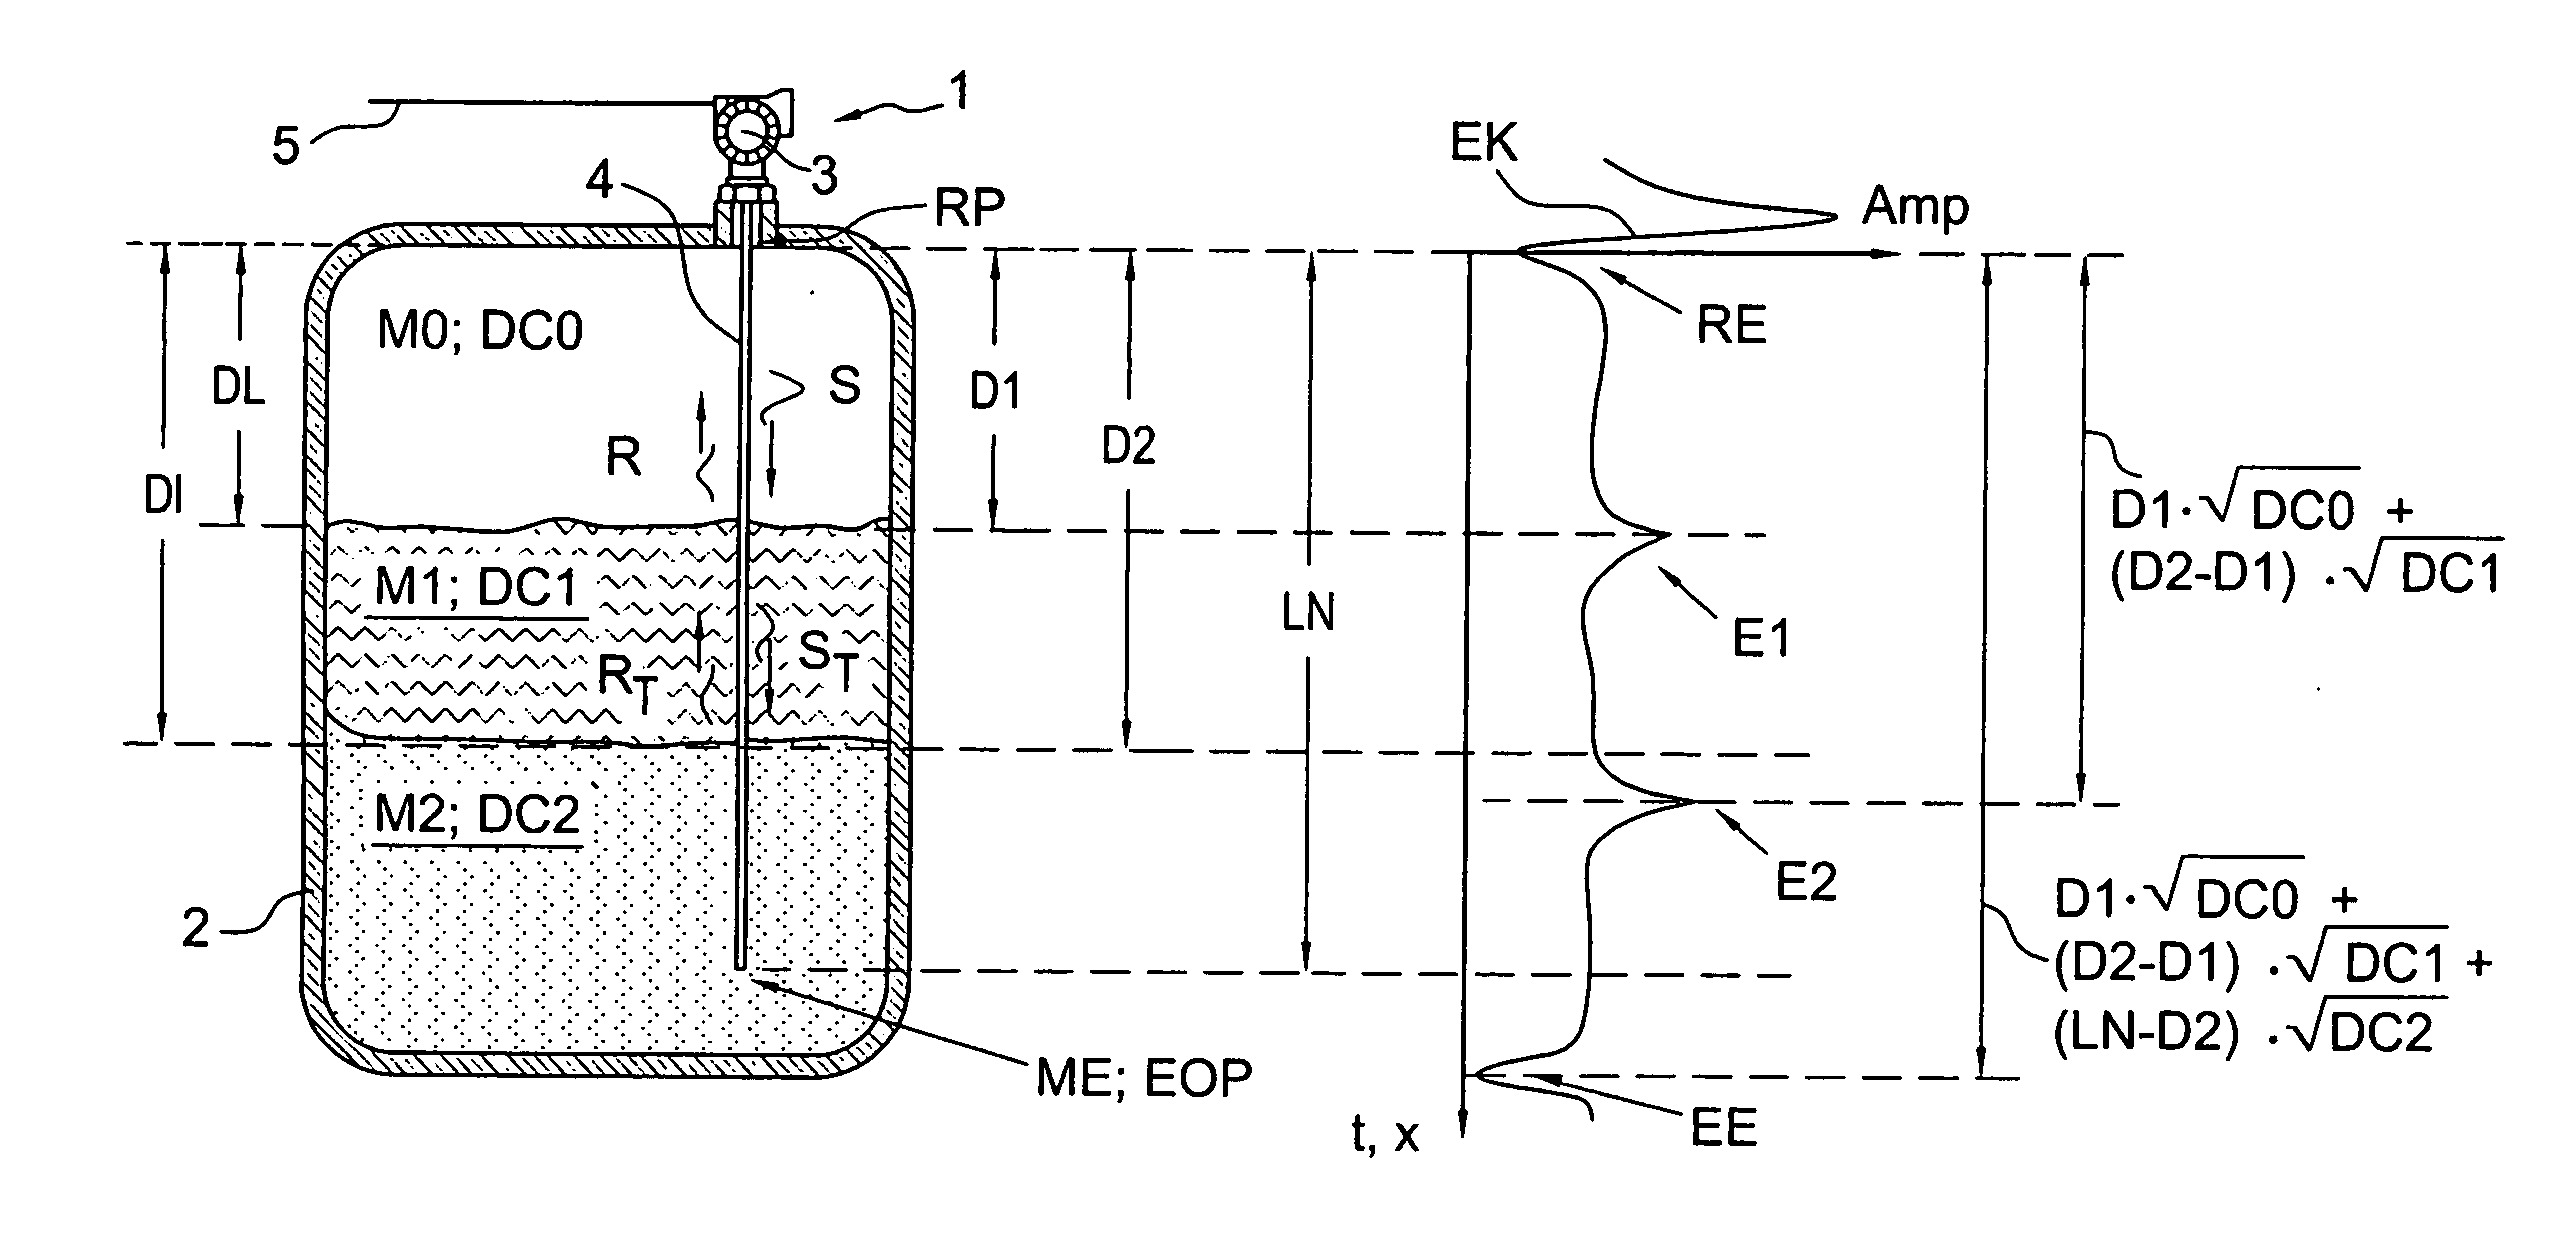 Method for ascertaining and/or evaluating fill-state of a container containing at least one medium